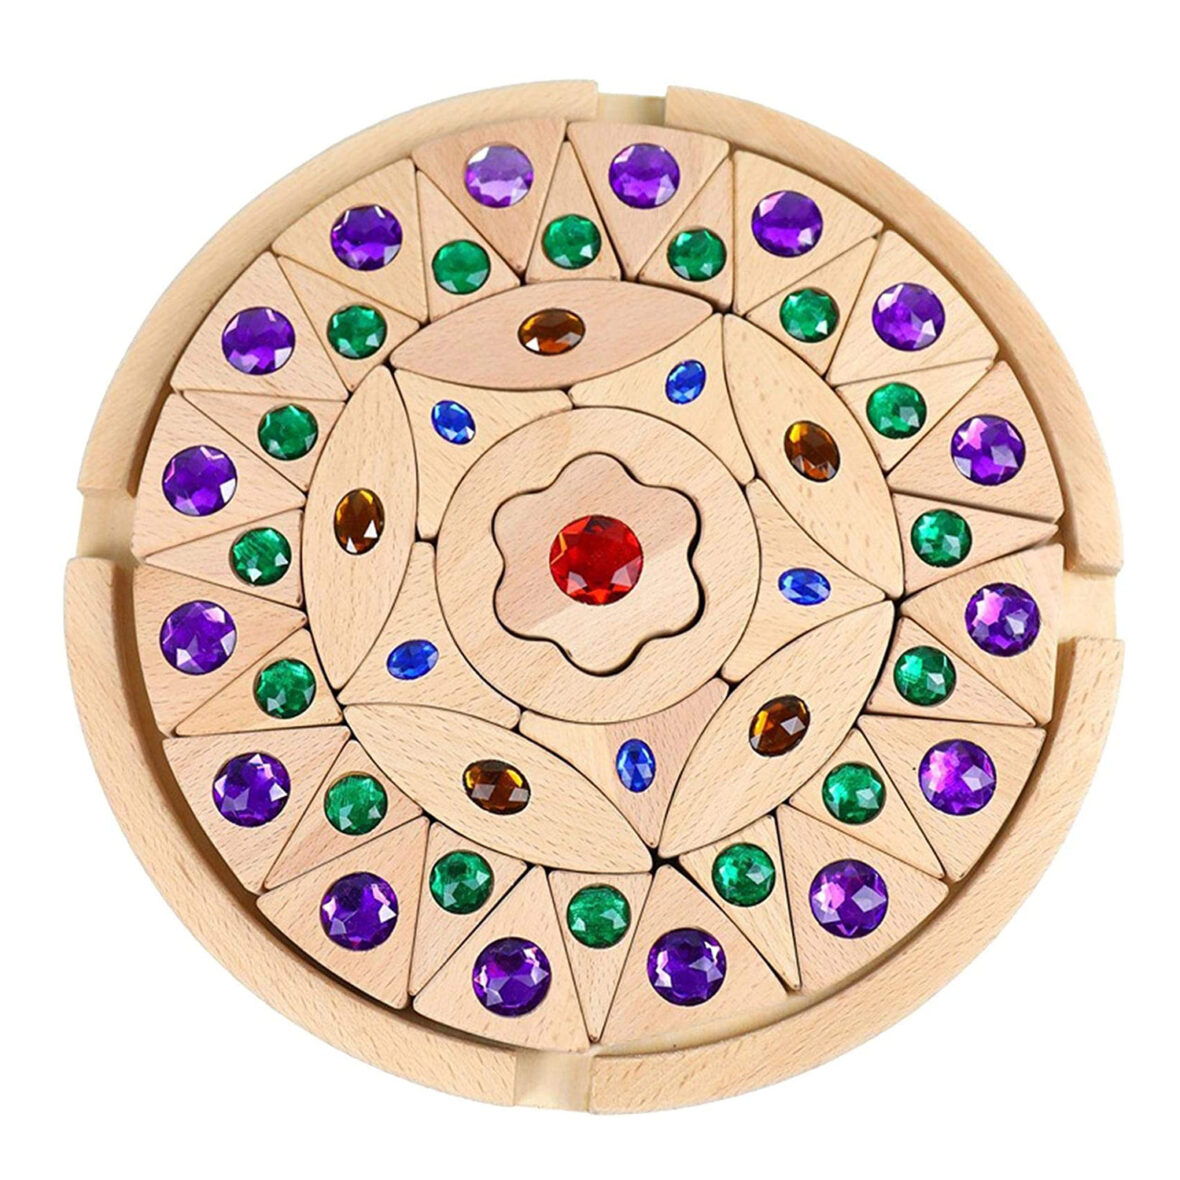 Earthily Wooden Puzzles Mandala Puzzle Building Blocks Educational Toy Gift for Children